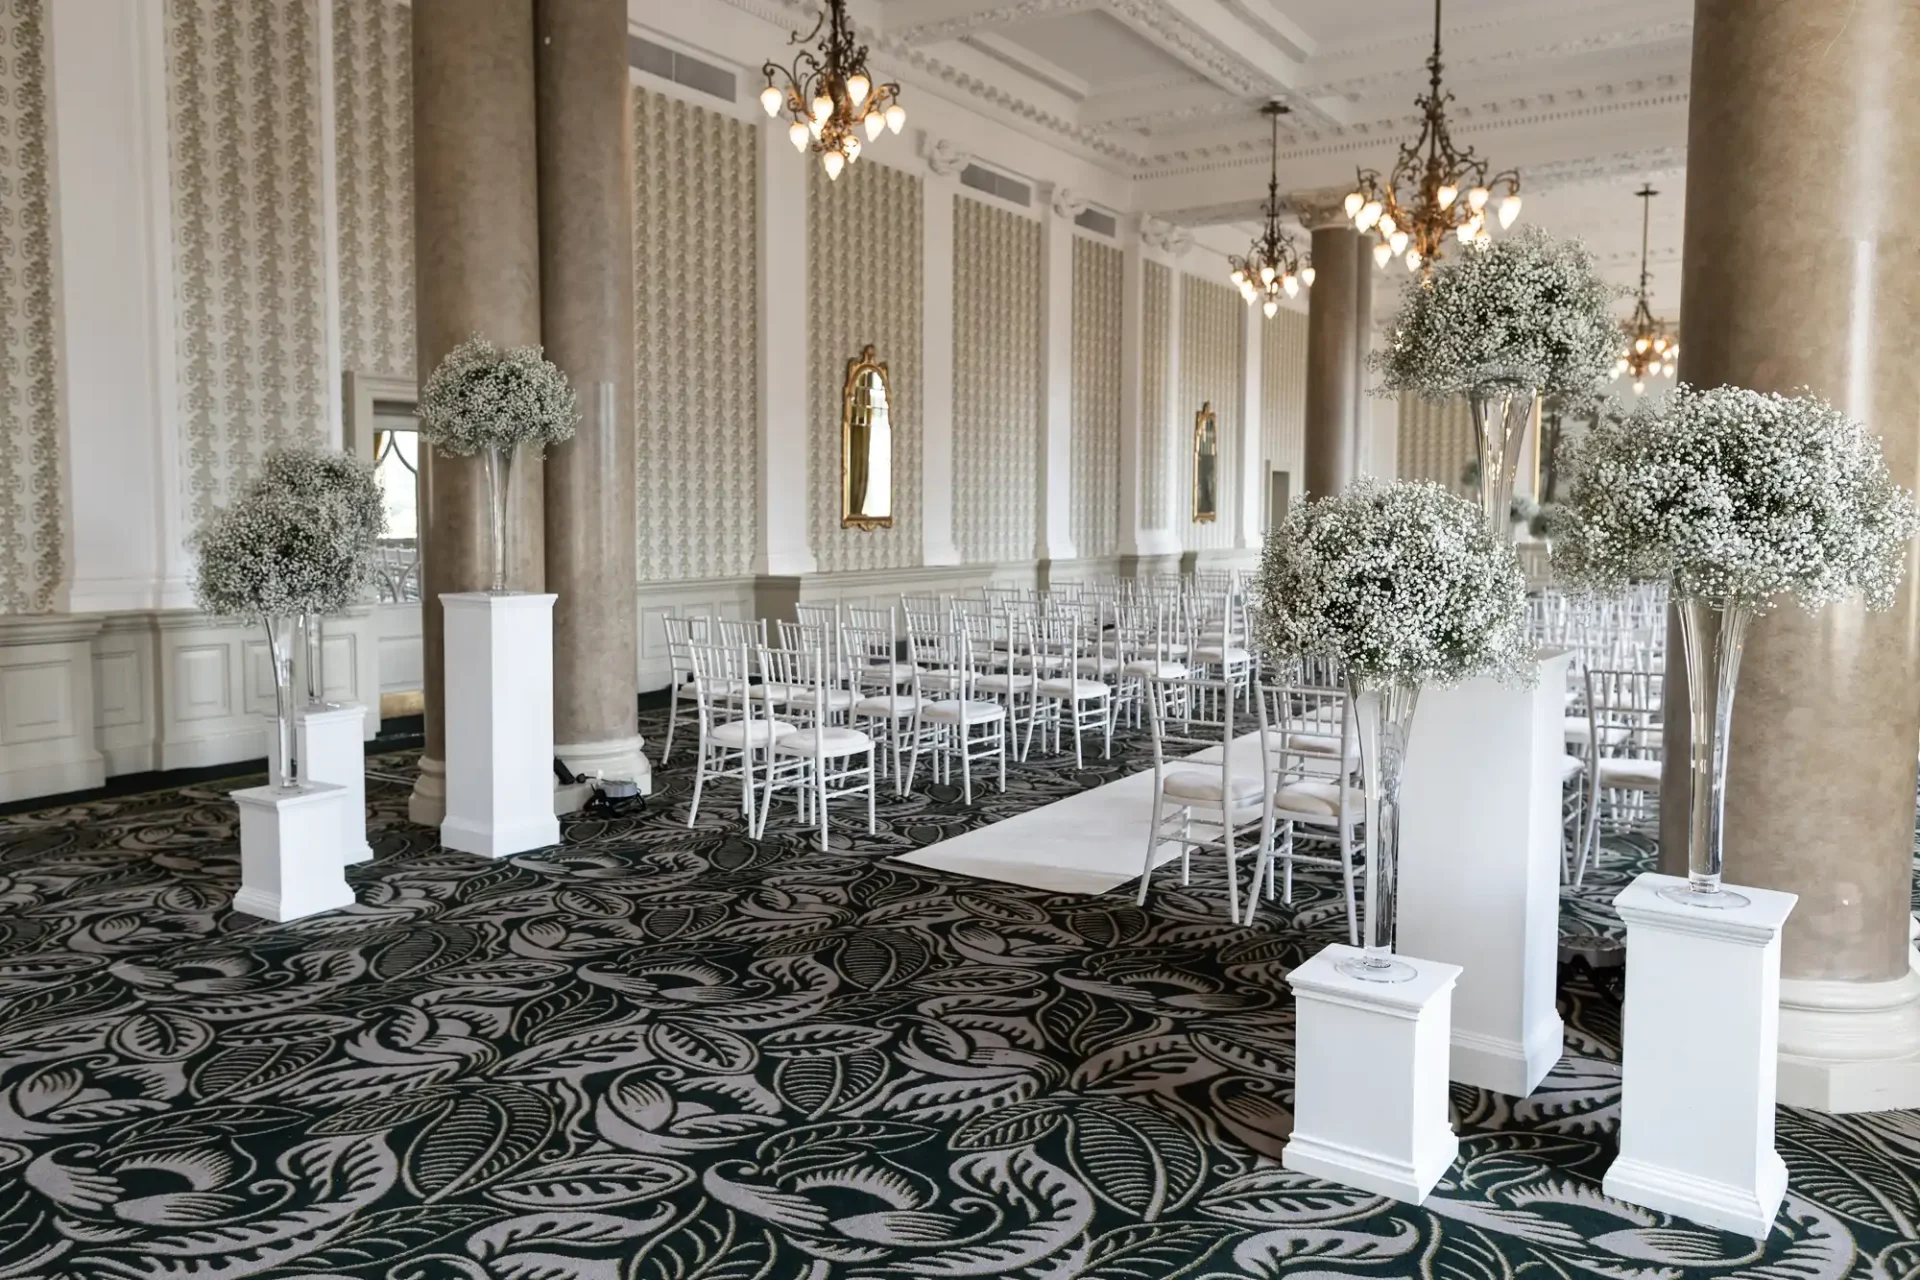 Elegant indoor wedding venue setup with rows of white chairs, floral arrangements on pedestals, and chandeliers in a room with patterned carpet and columned walls.